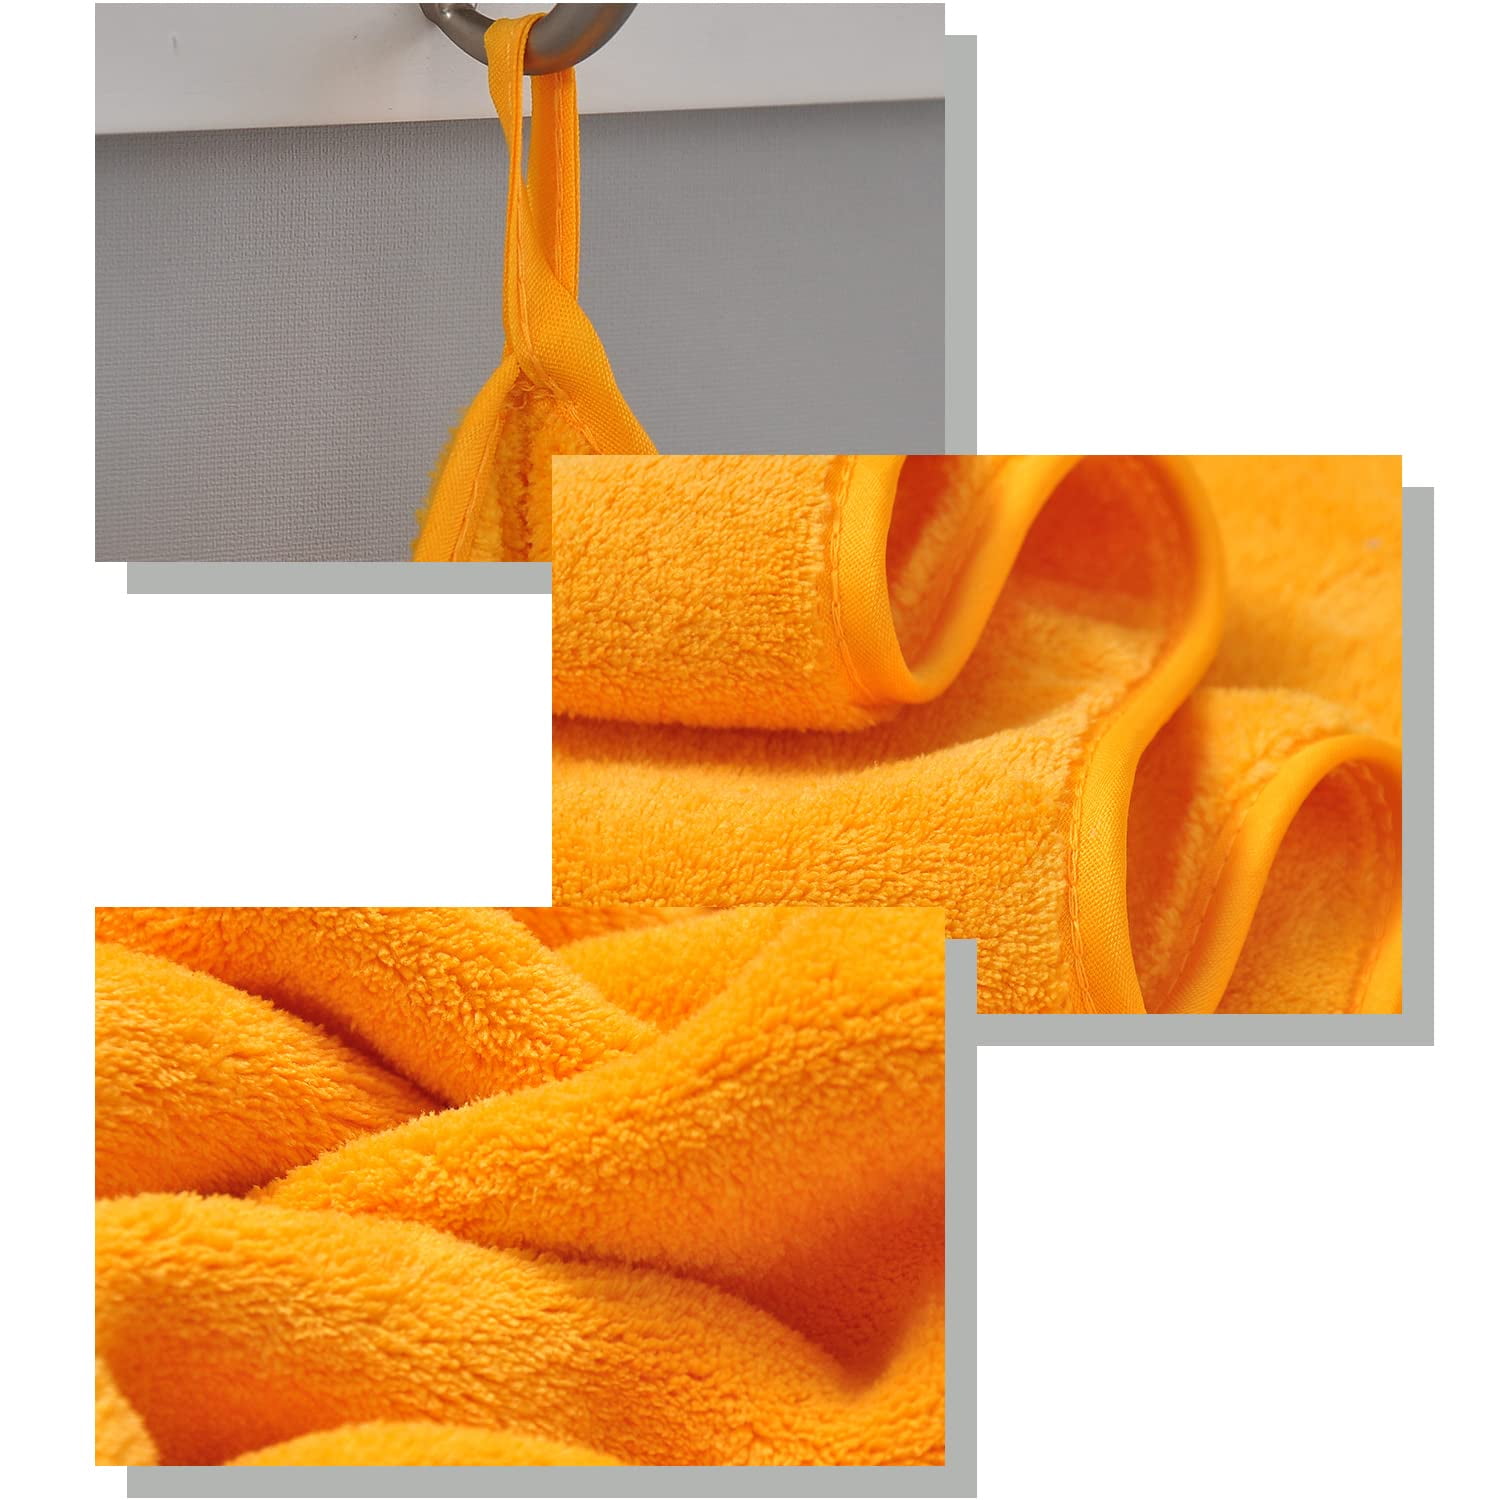 GraceAier Ultra Soft Oversize Bath Towels 2 Pack (35 x 70) - Quick Drying - - Microfiber Coral Velvet Highly Absorbent Towel F